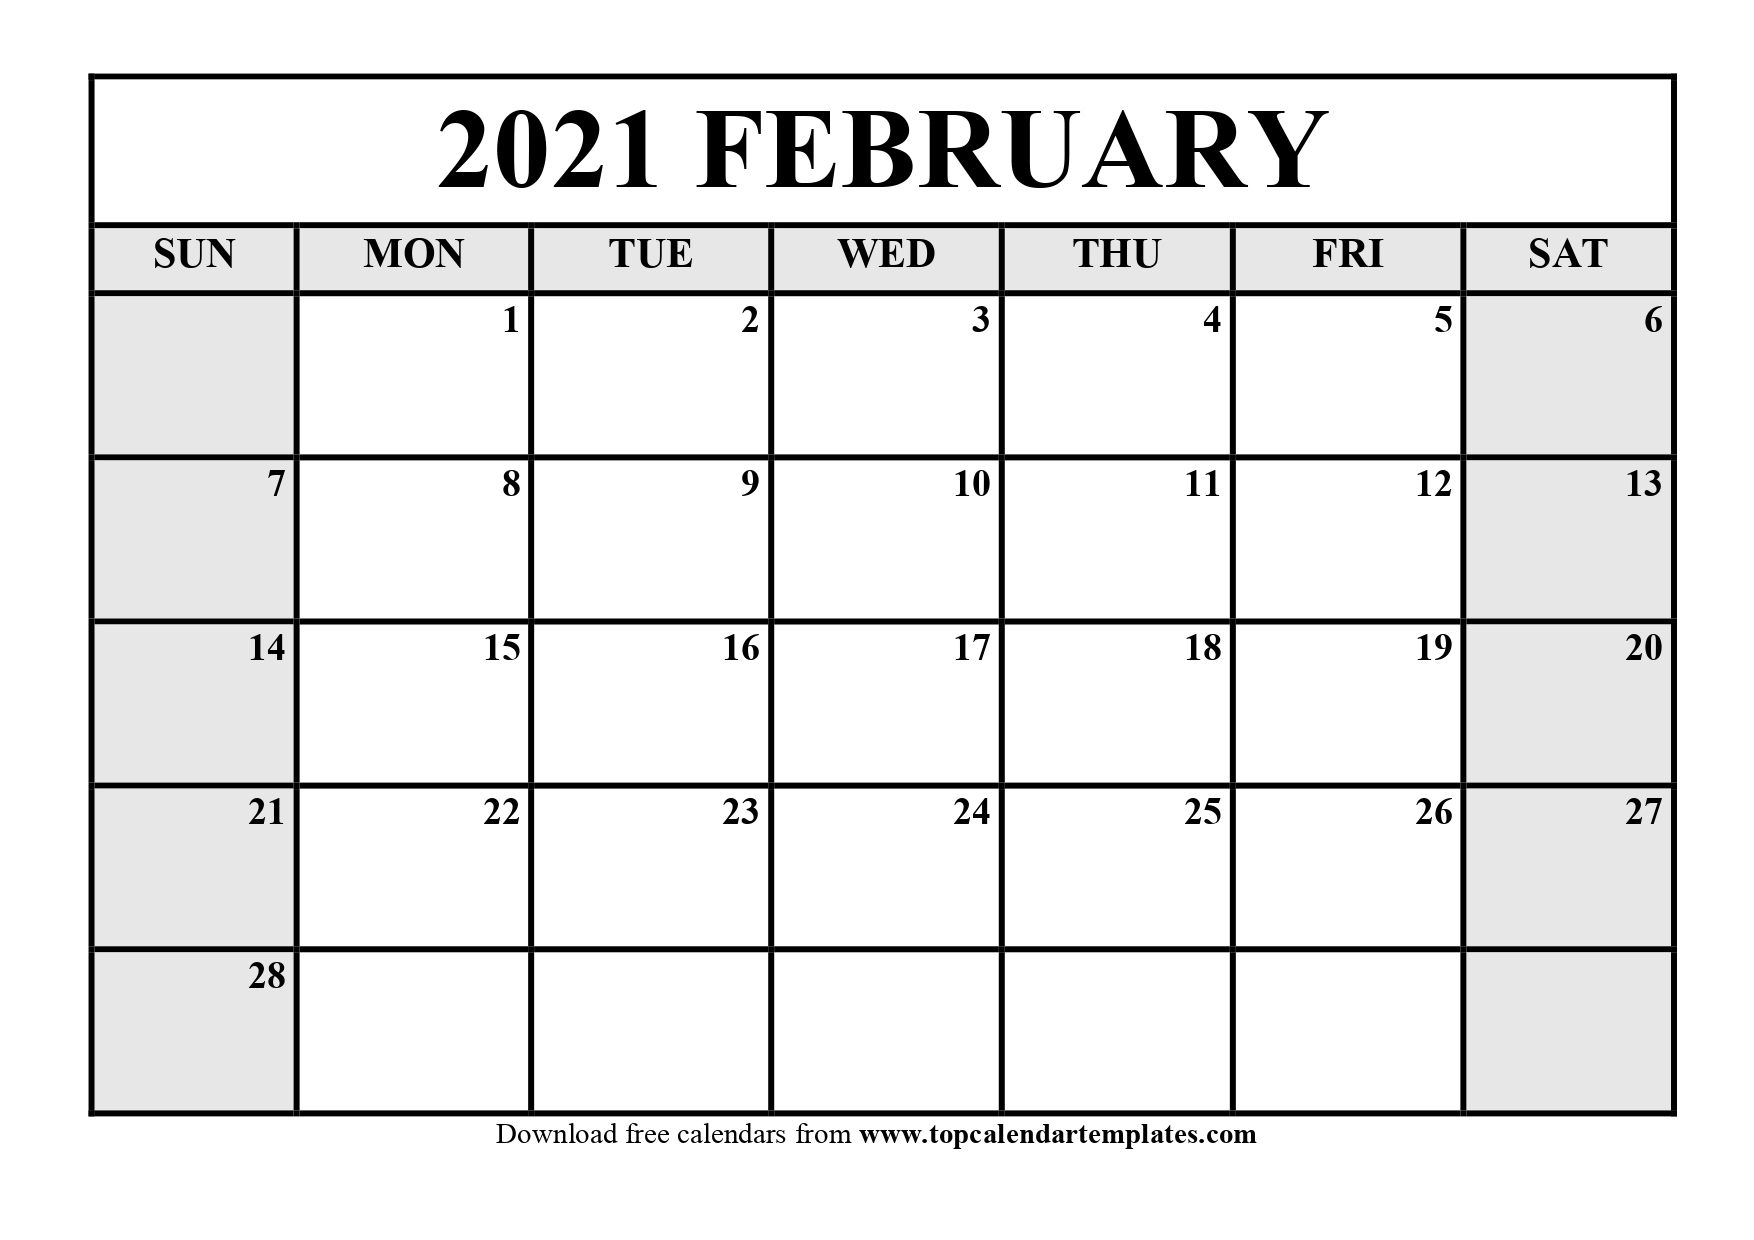 2021 Print Free Calendars Without Downloading | Calendar ...